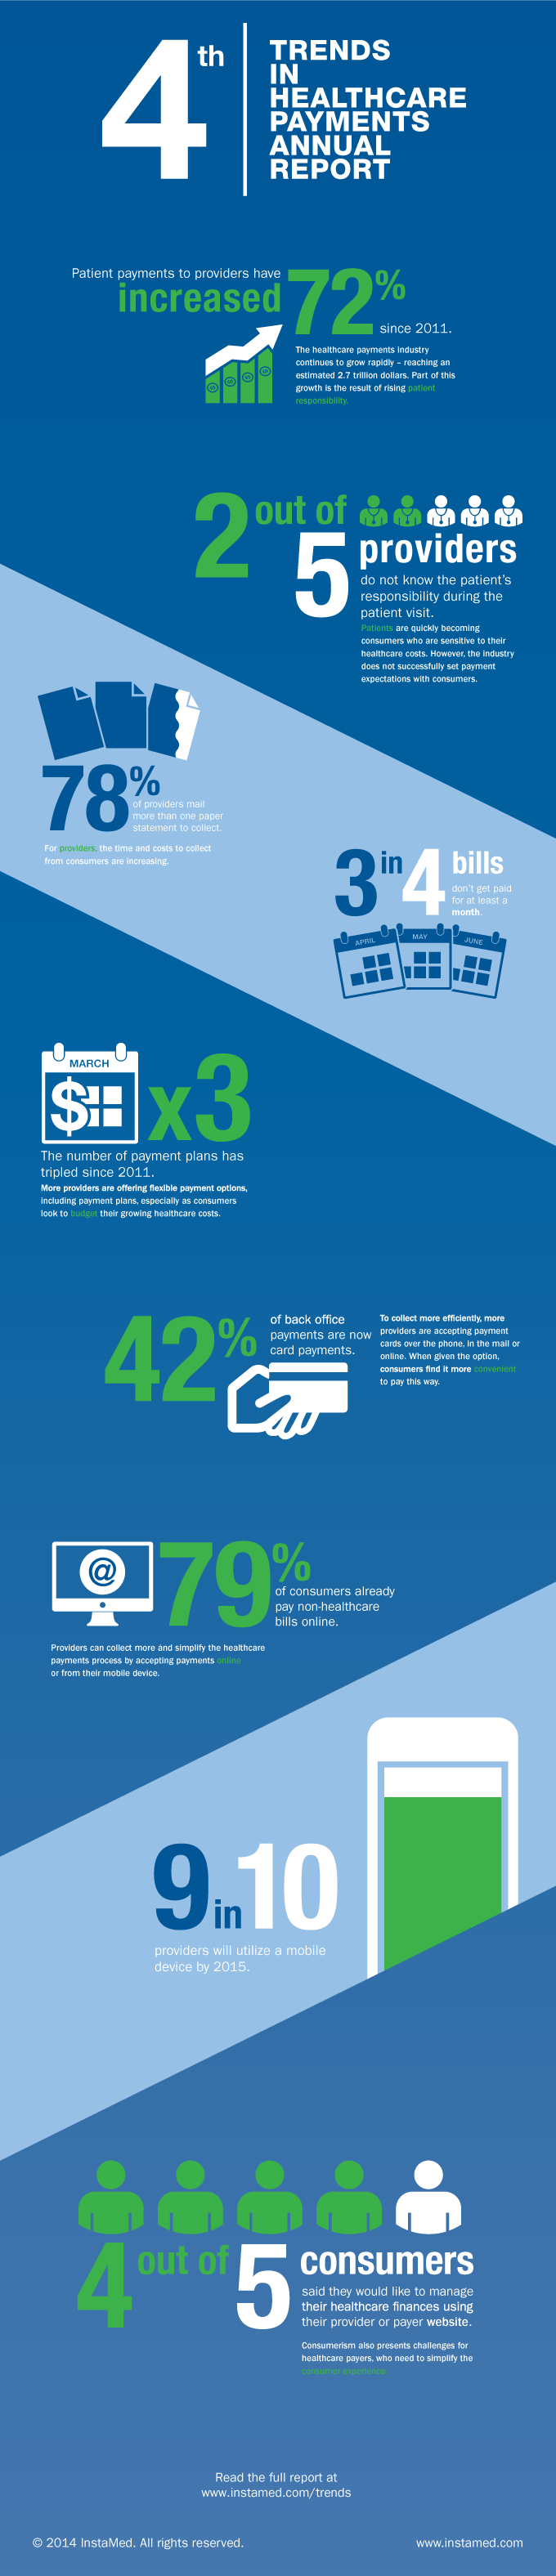 2013 trends in healthcare payments infographic